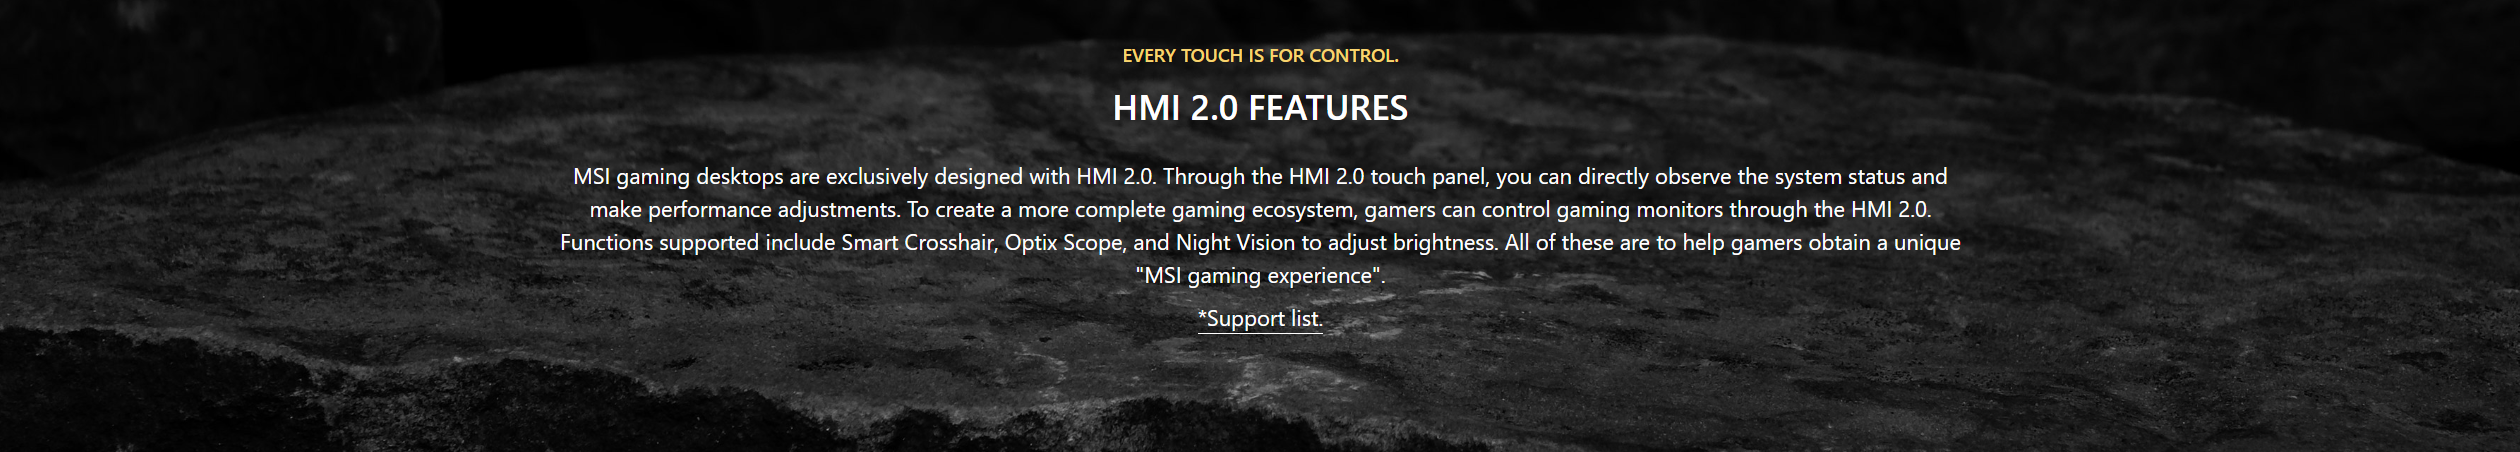 MSI gaming desktops are exclusively designed with HMI 2.0. Through the HMI 2.0 touch panel, you can directly observe the system status and make performance adjustments. To create a more complete gaming ecosystem, gamers can control gaming monitors through the HMI 2.0. Functions supported include Smart Crosshair, Optix Scope, and Night Vision to adjust brightness. All of these are to help gamers obtain a unique MSI gaming experience.